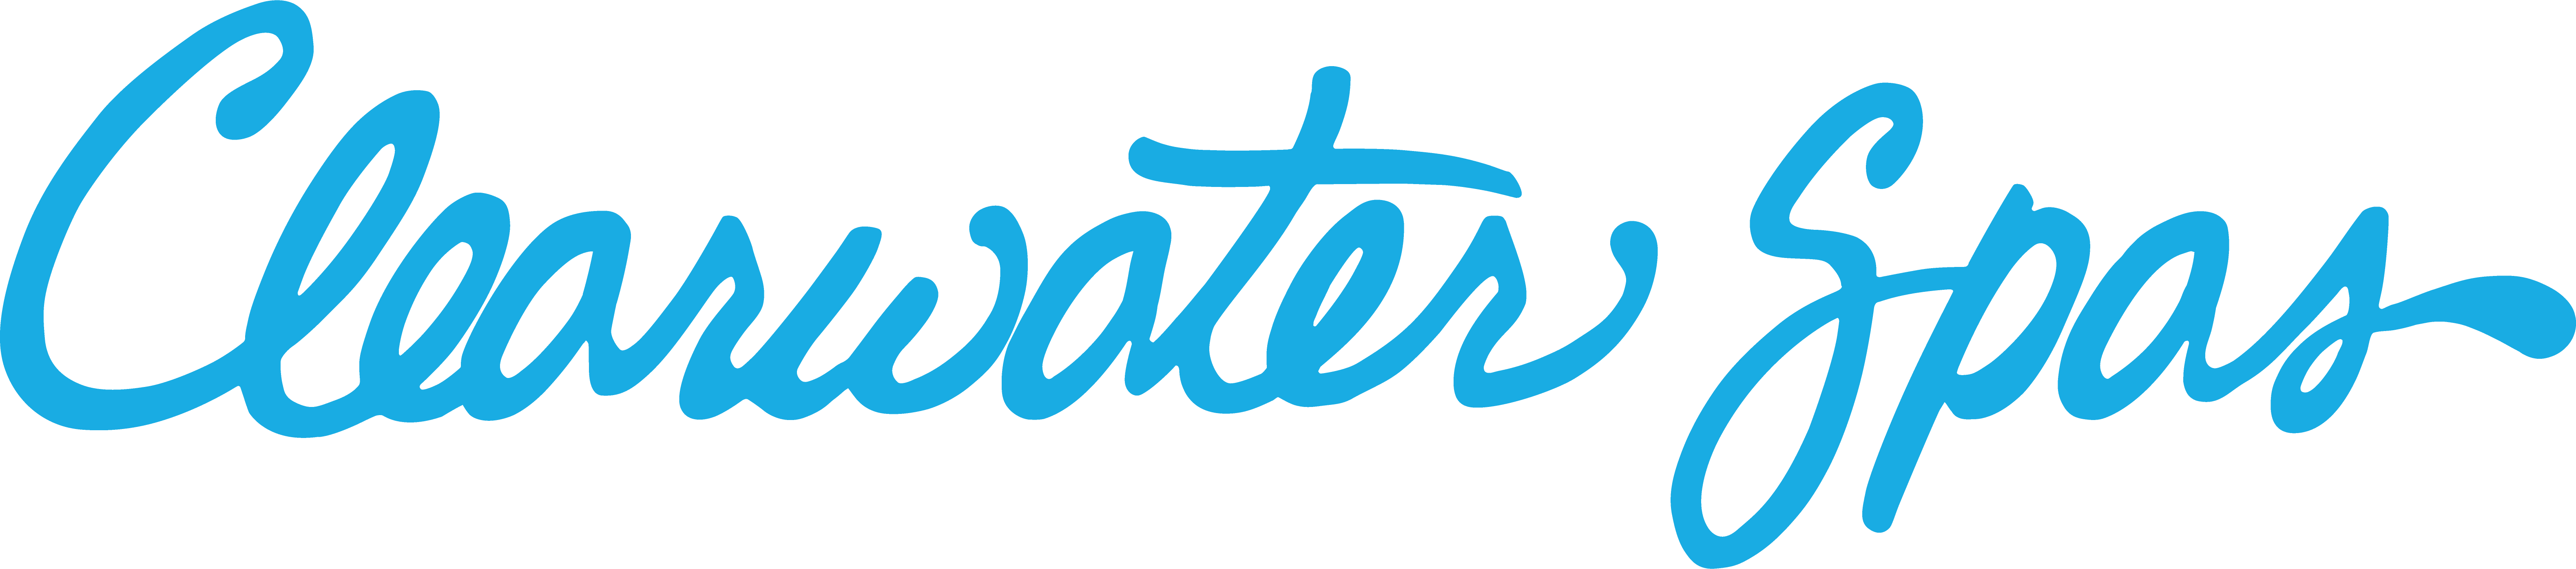 Clearwater Spas Logo